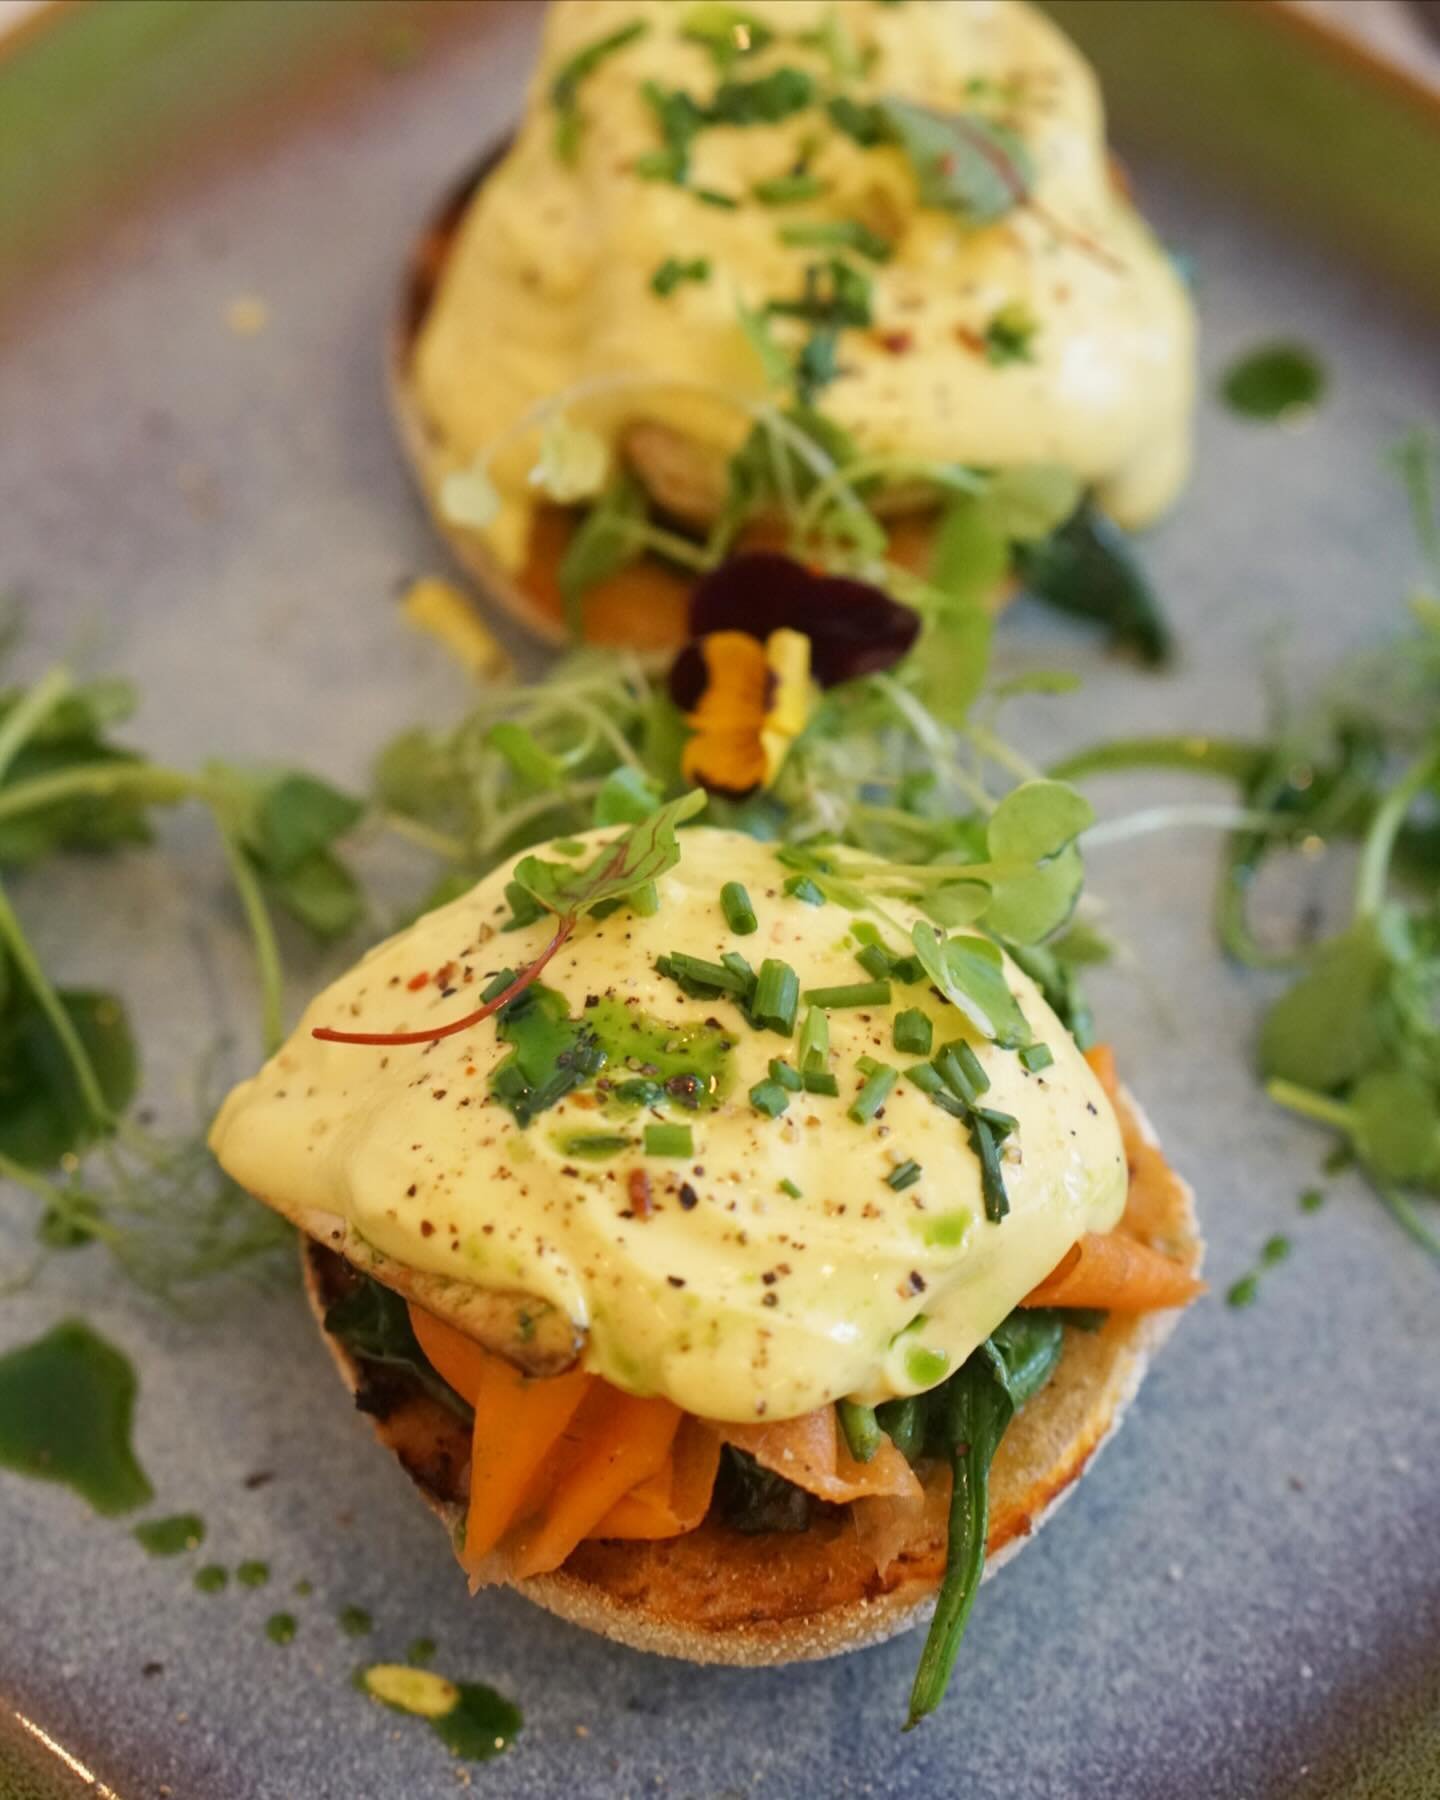 Another one off the new menu. Replacing our classic tofu Benedict, we&rsquo;ve leveled up and now have the &lsquo;Rise Royal&rsquo;, featuring our own hollandaise sauce, smoked carrot, tofu, spinach, served on an English muffin with chives.

Are you 